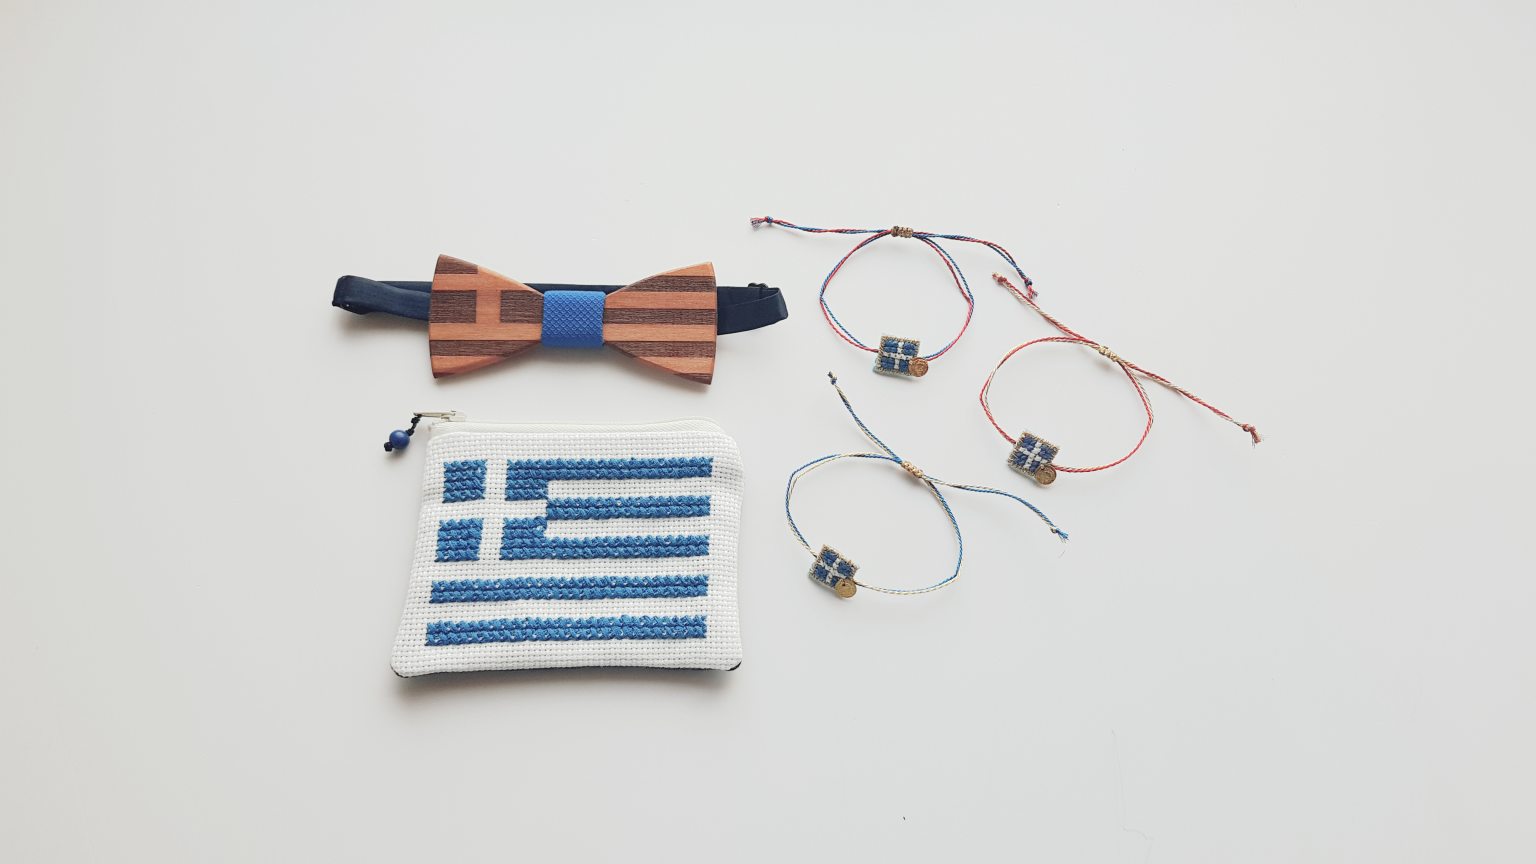 Mini hand-embroidered pochette with Greek flag